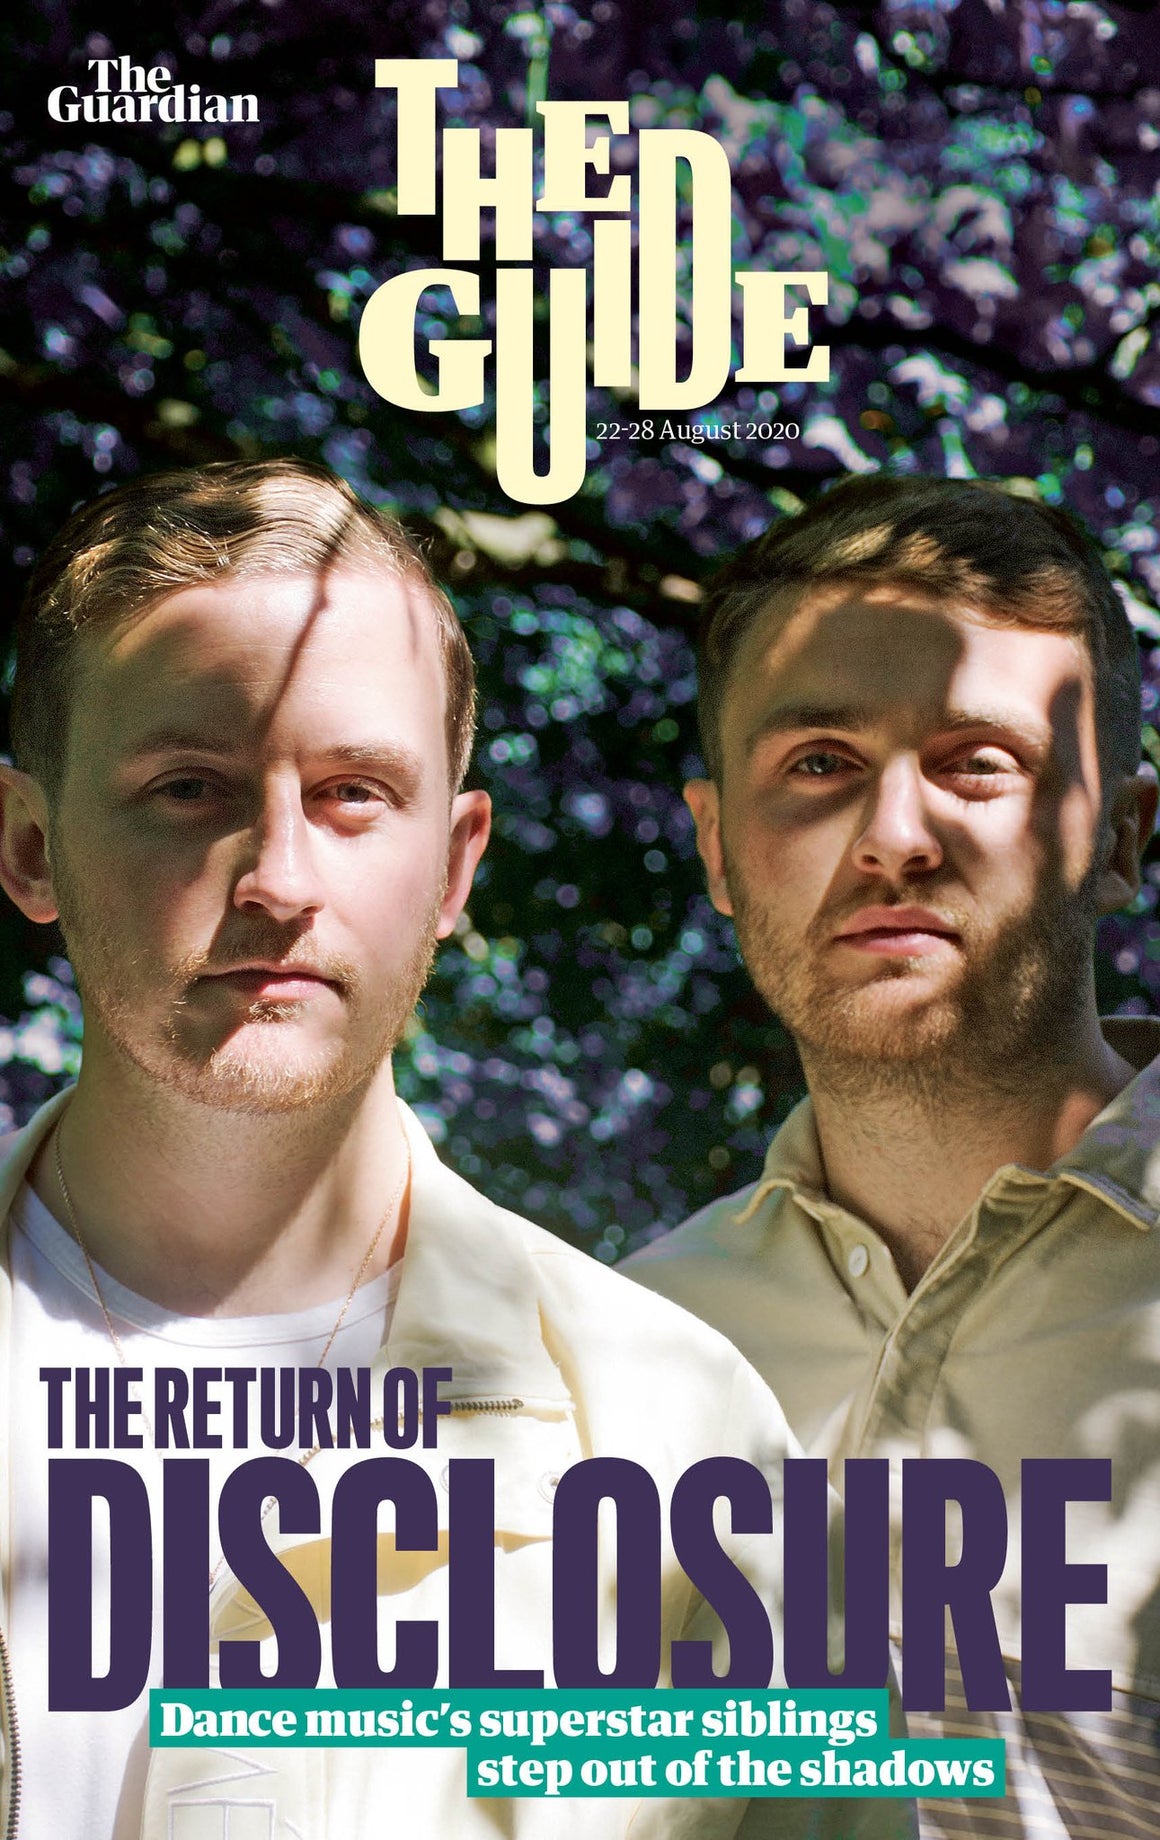 UK GUIDE Magazine August 2020: DISCLOSURE COVER AND FEATURE Robert Pattinson